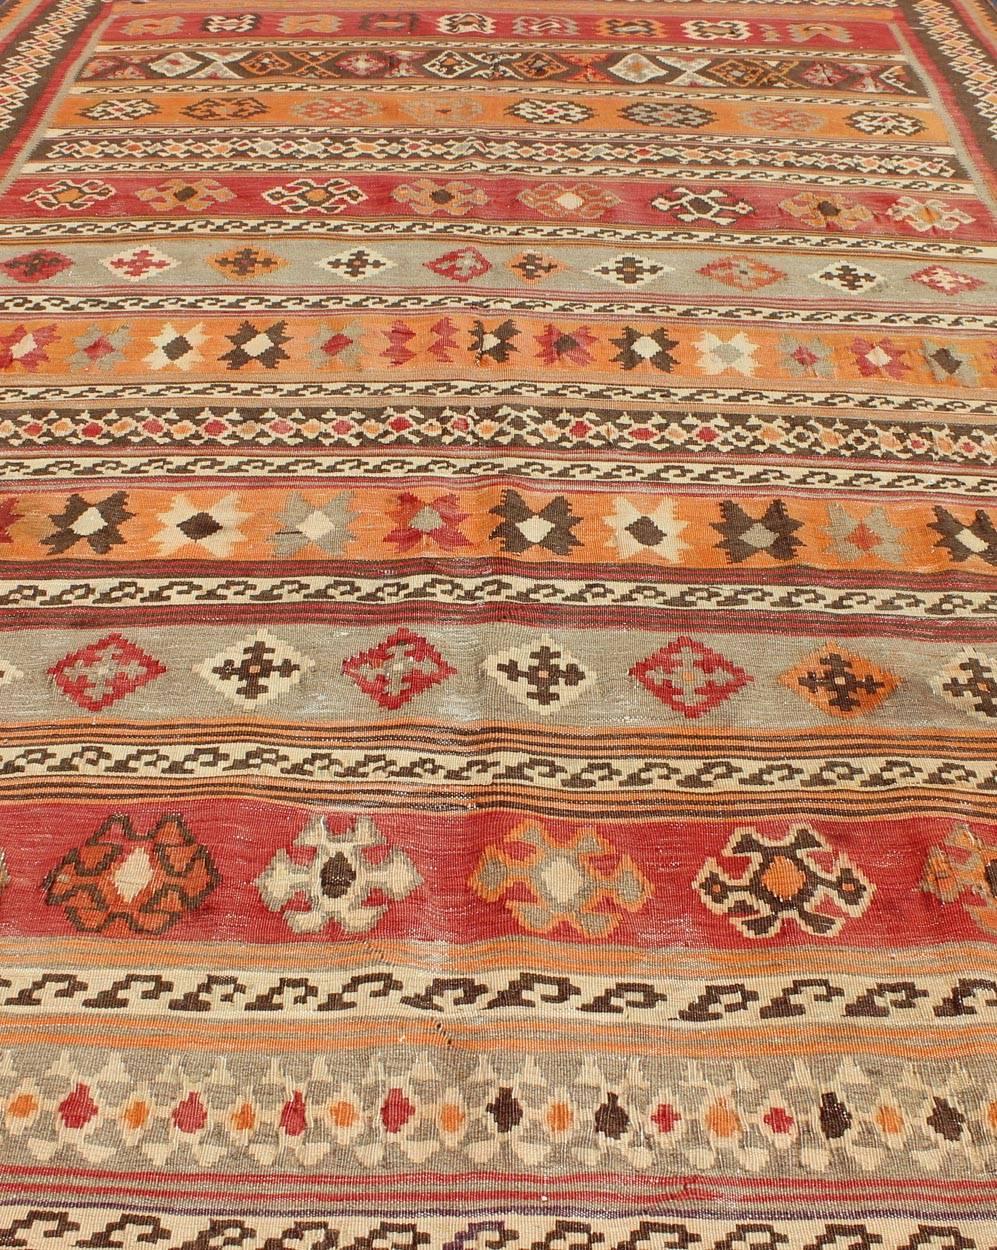 Antique Moroccan Kilim with Embroidery in Red, Orange, Gray and Brown For Sale 1